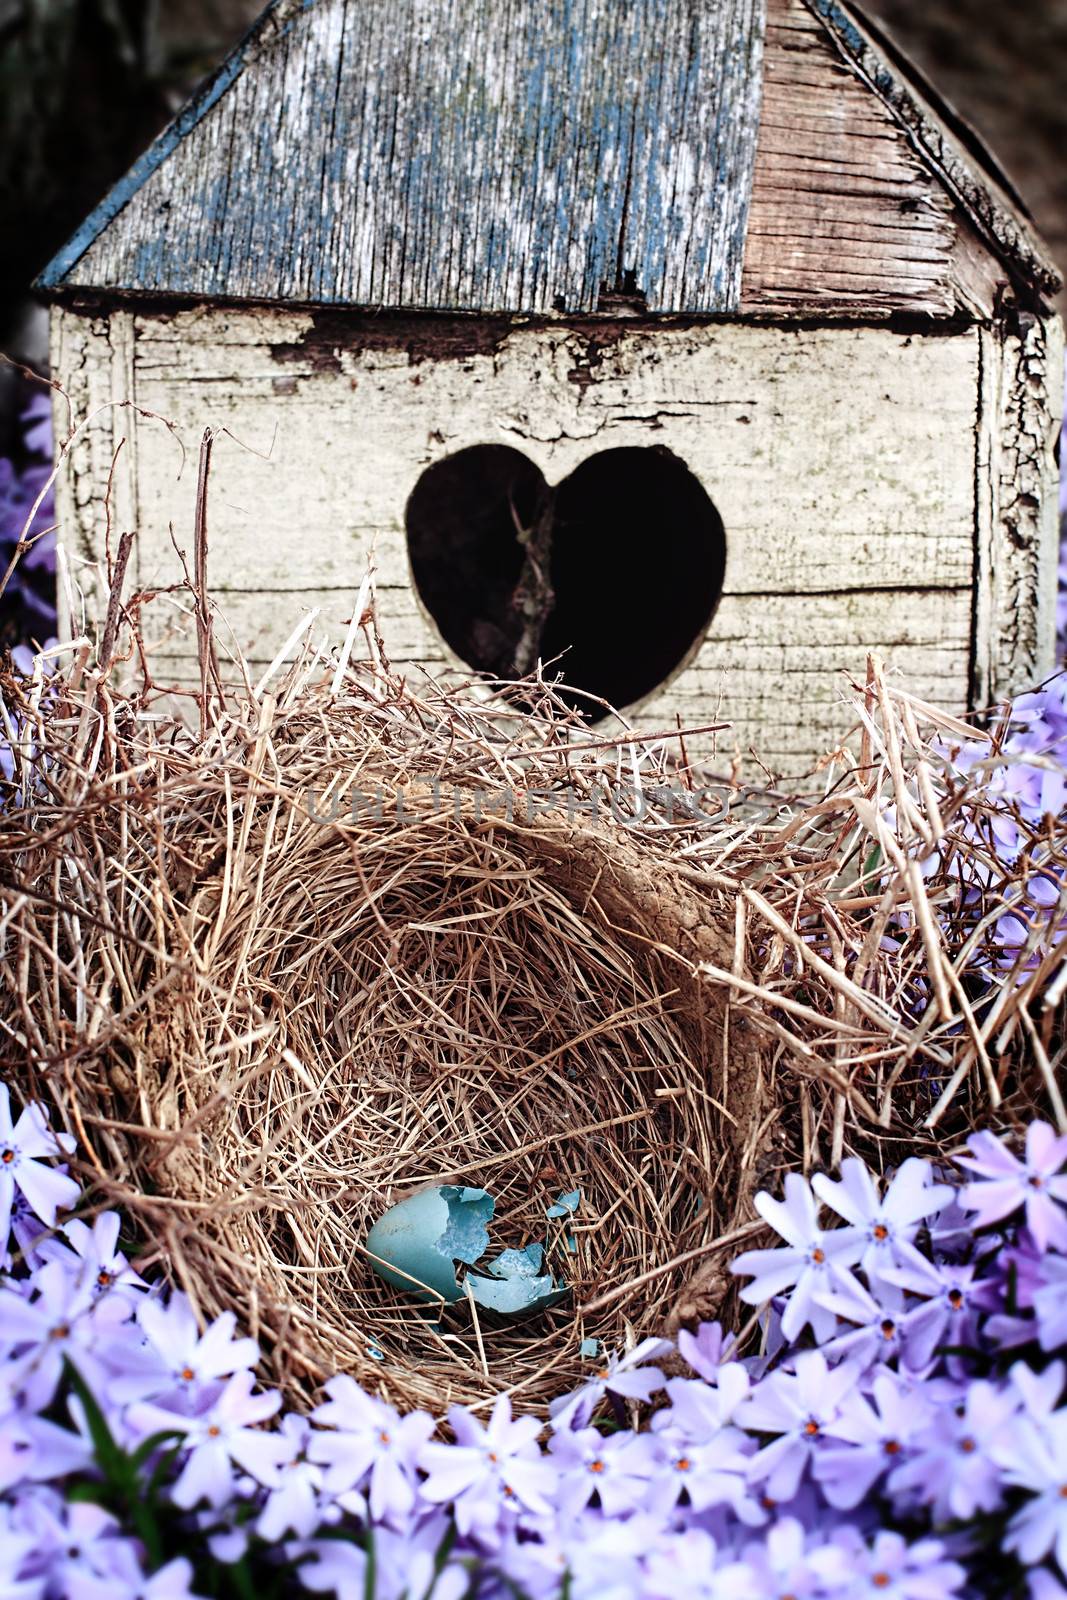 Broken blue egg lying in a nest in front of an old rustic bird house.
